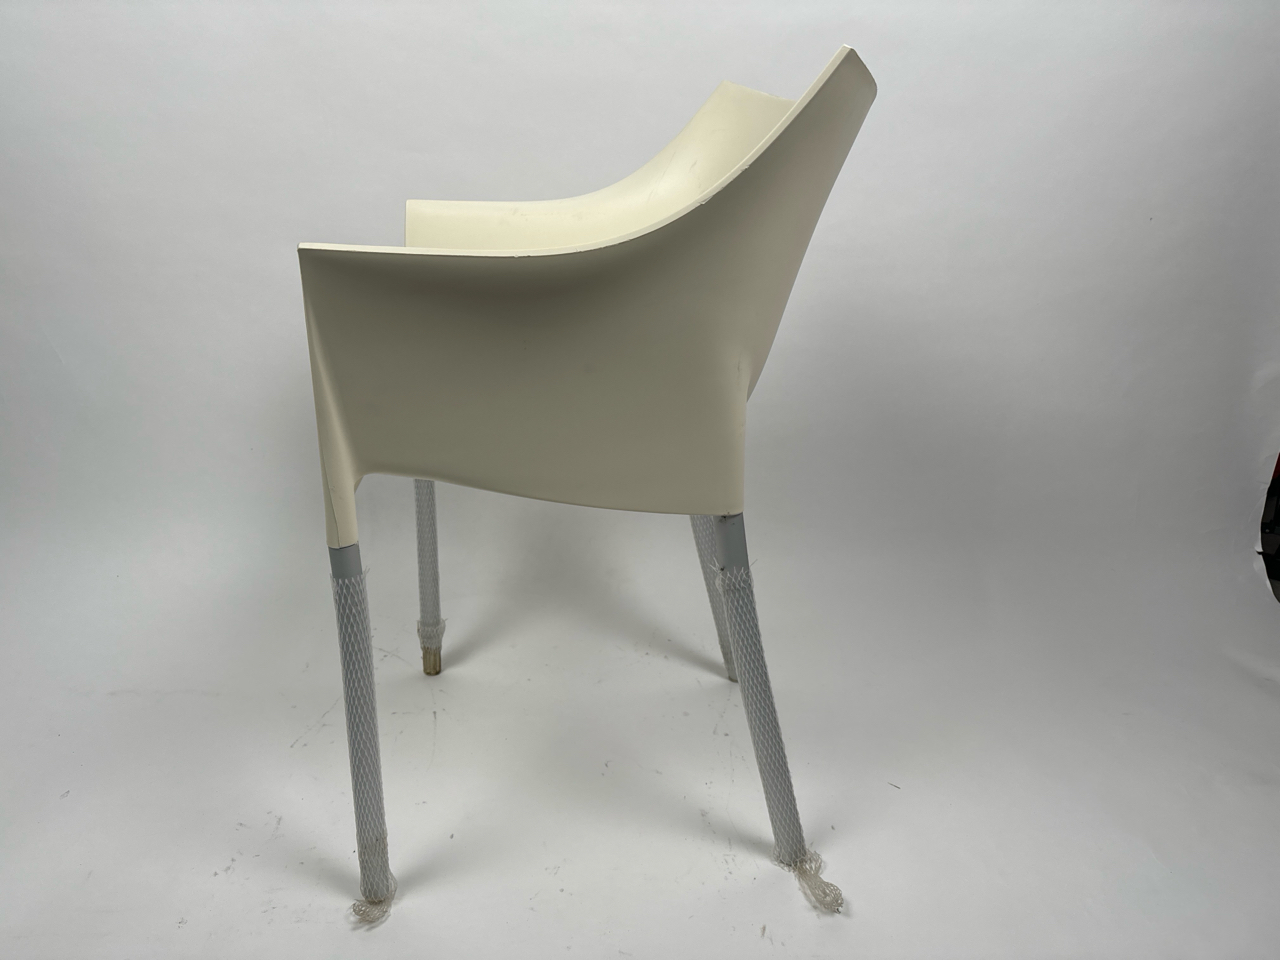 Kartell Dr No Chair - Image 3 of 3